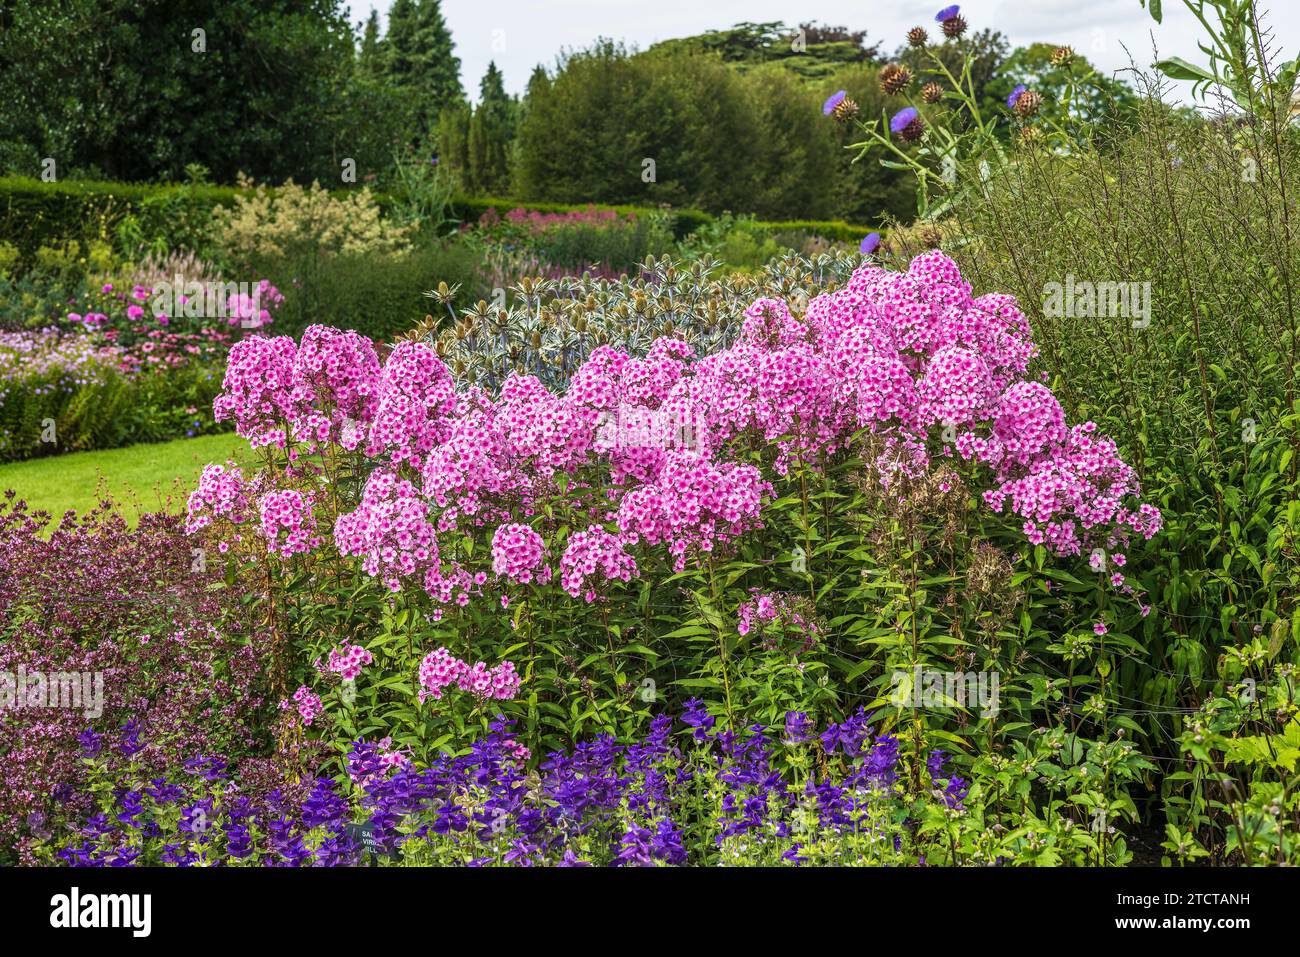 Tall pink hardy phlox plants in full bloom in a large herbaceous border against blue eryngiums. Stock Photo